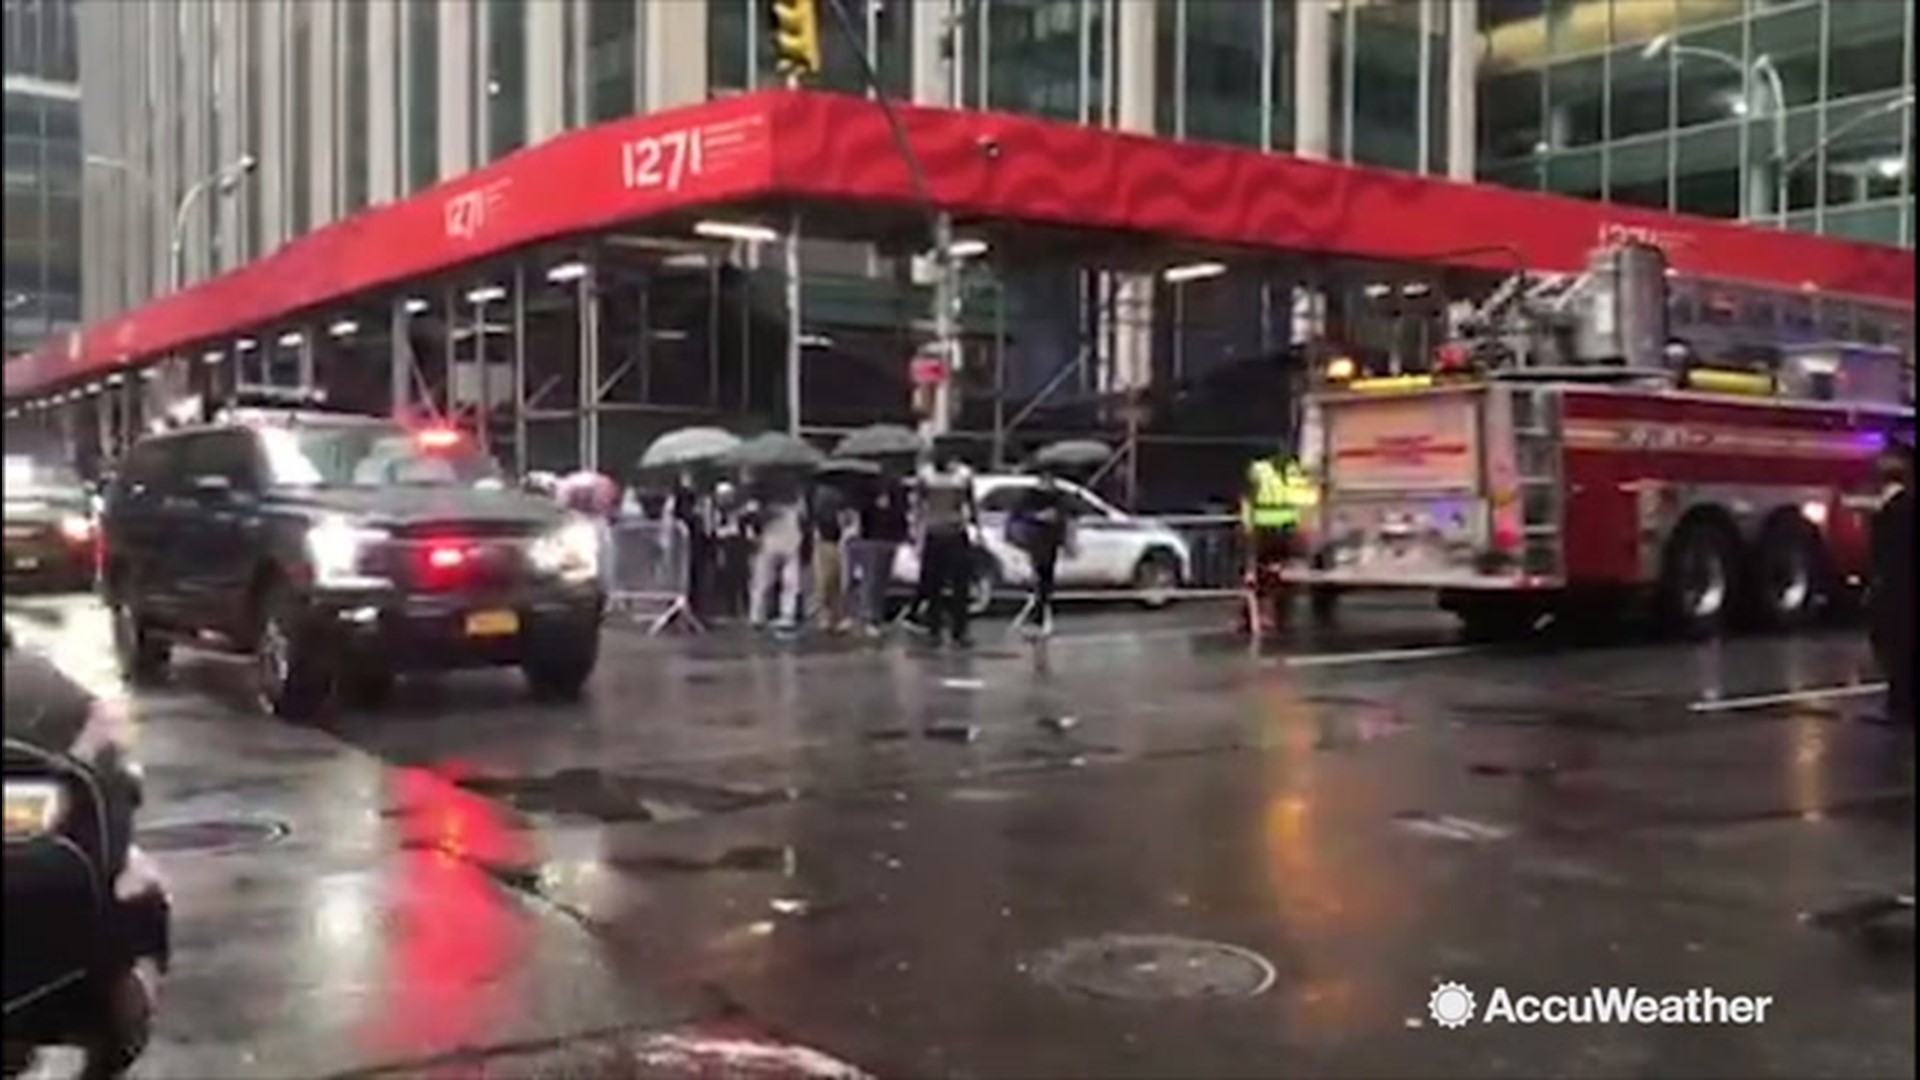 A dramatic scene unfolded in New York, New York on June 10 as Manhattan streets were filled with fire trucks and police following a helicopter crash in the city.